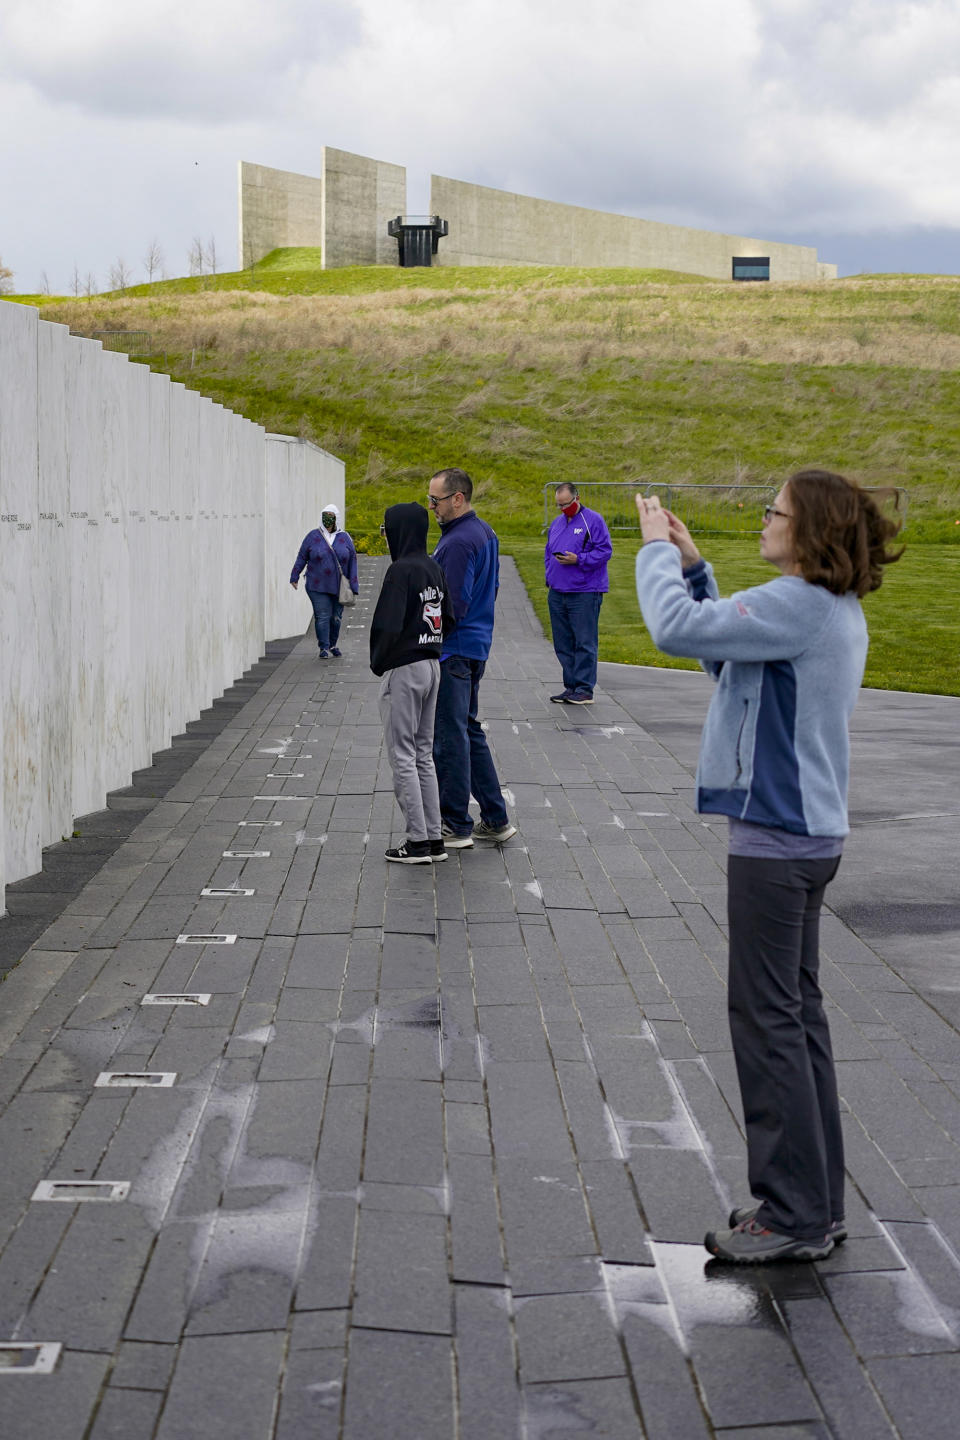 Visitors photograph and look over the Wall of Names at the Flight 93 National Memorial, Saturday, May 8, 2021, in Shanksville, Pa. The organization "Friends of Flight 93" is creating a new annual award for heroism that aims to reward selfless acts of heroism, but also to educate the public on what happened when those aboard hijacked Flight 93 learned of the attacks that had just occurred in New York and Washington D.C. The passengers and crew tried to wrest control of the aircraft they were on, which crashed into a field leaving no survivors. (AP Photo/Keith Srakocic)